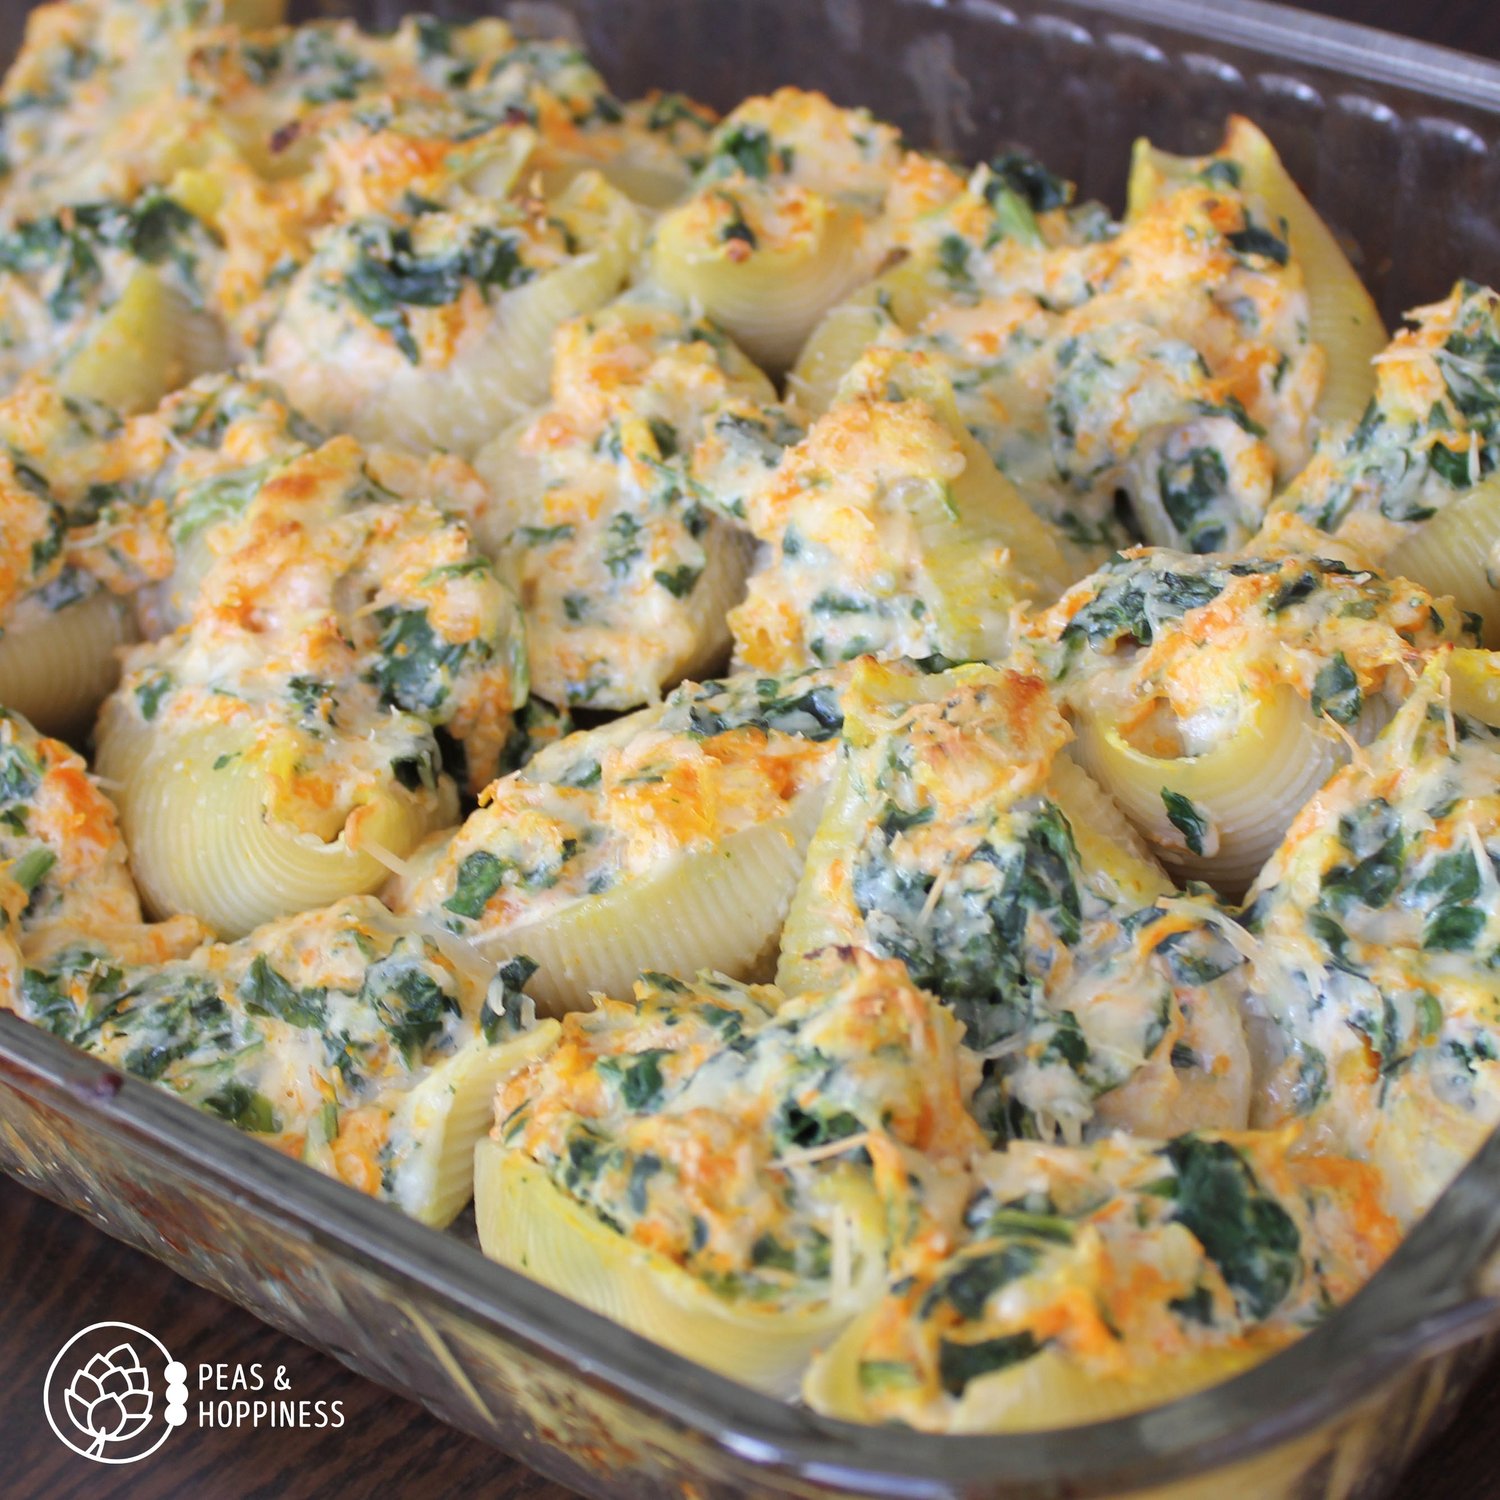 Butternut Squash and Spinach Stuffed Shells - Featured on the Peas & Hoppy Meal Guides customizable meal planning service